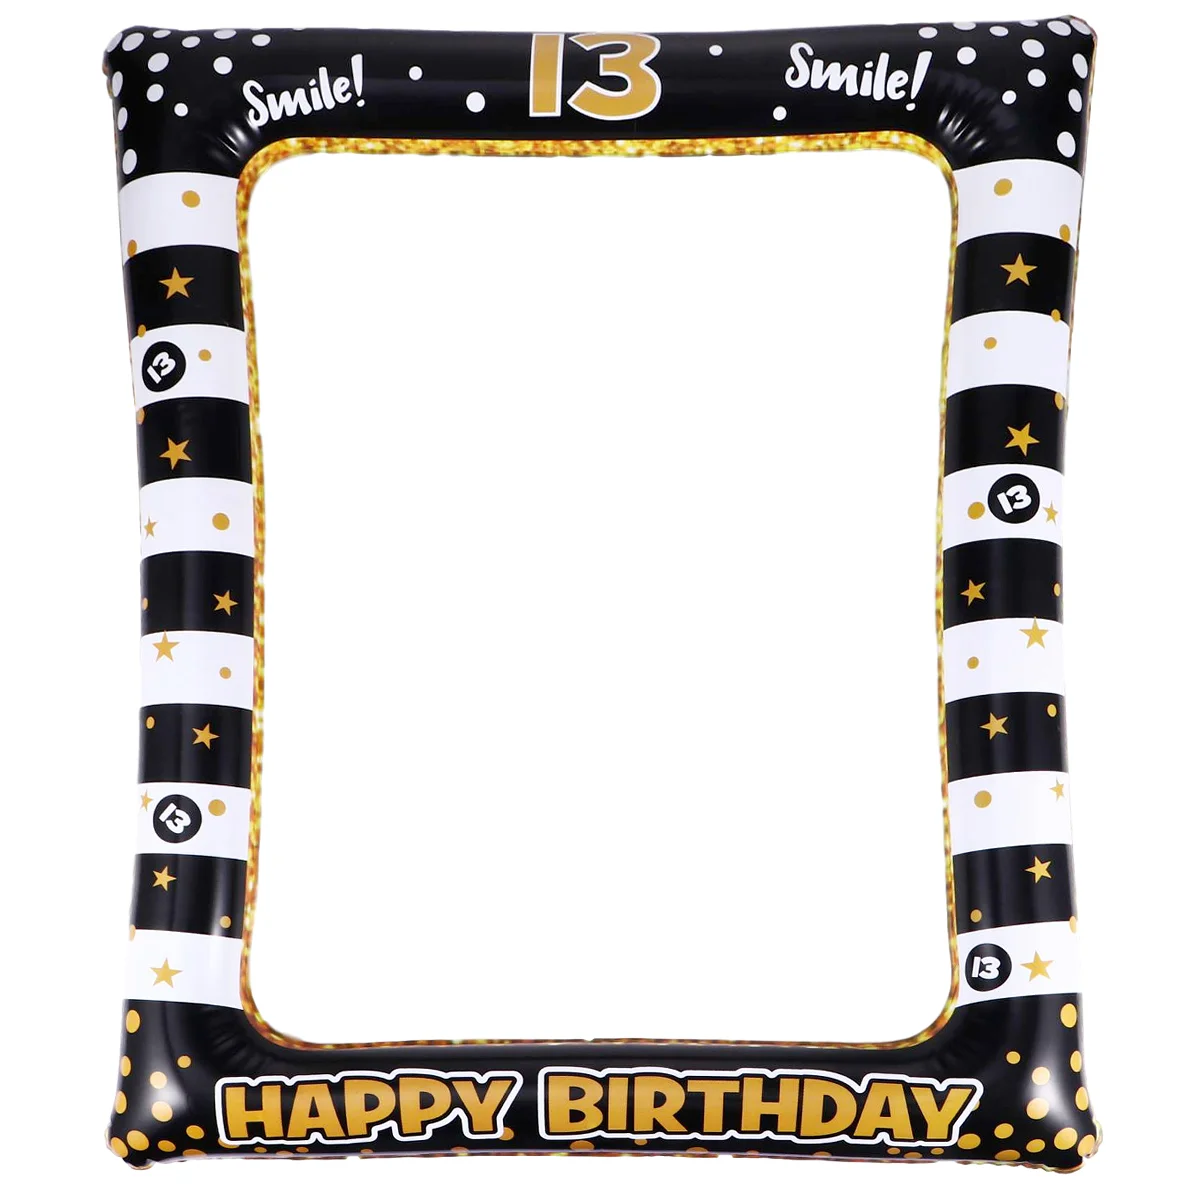 Photo Booth Prop Frame Wedding Picture Frame Mahogany Photo Frame 13th Birthday Party Decor Wedding Signs